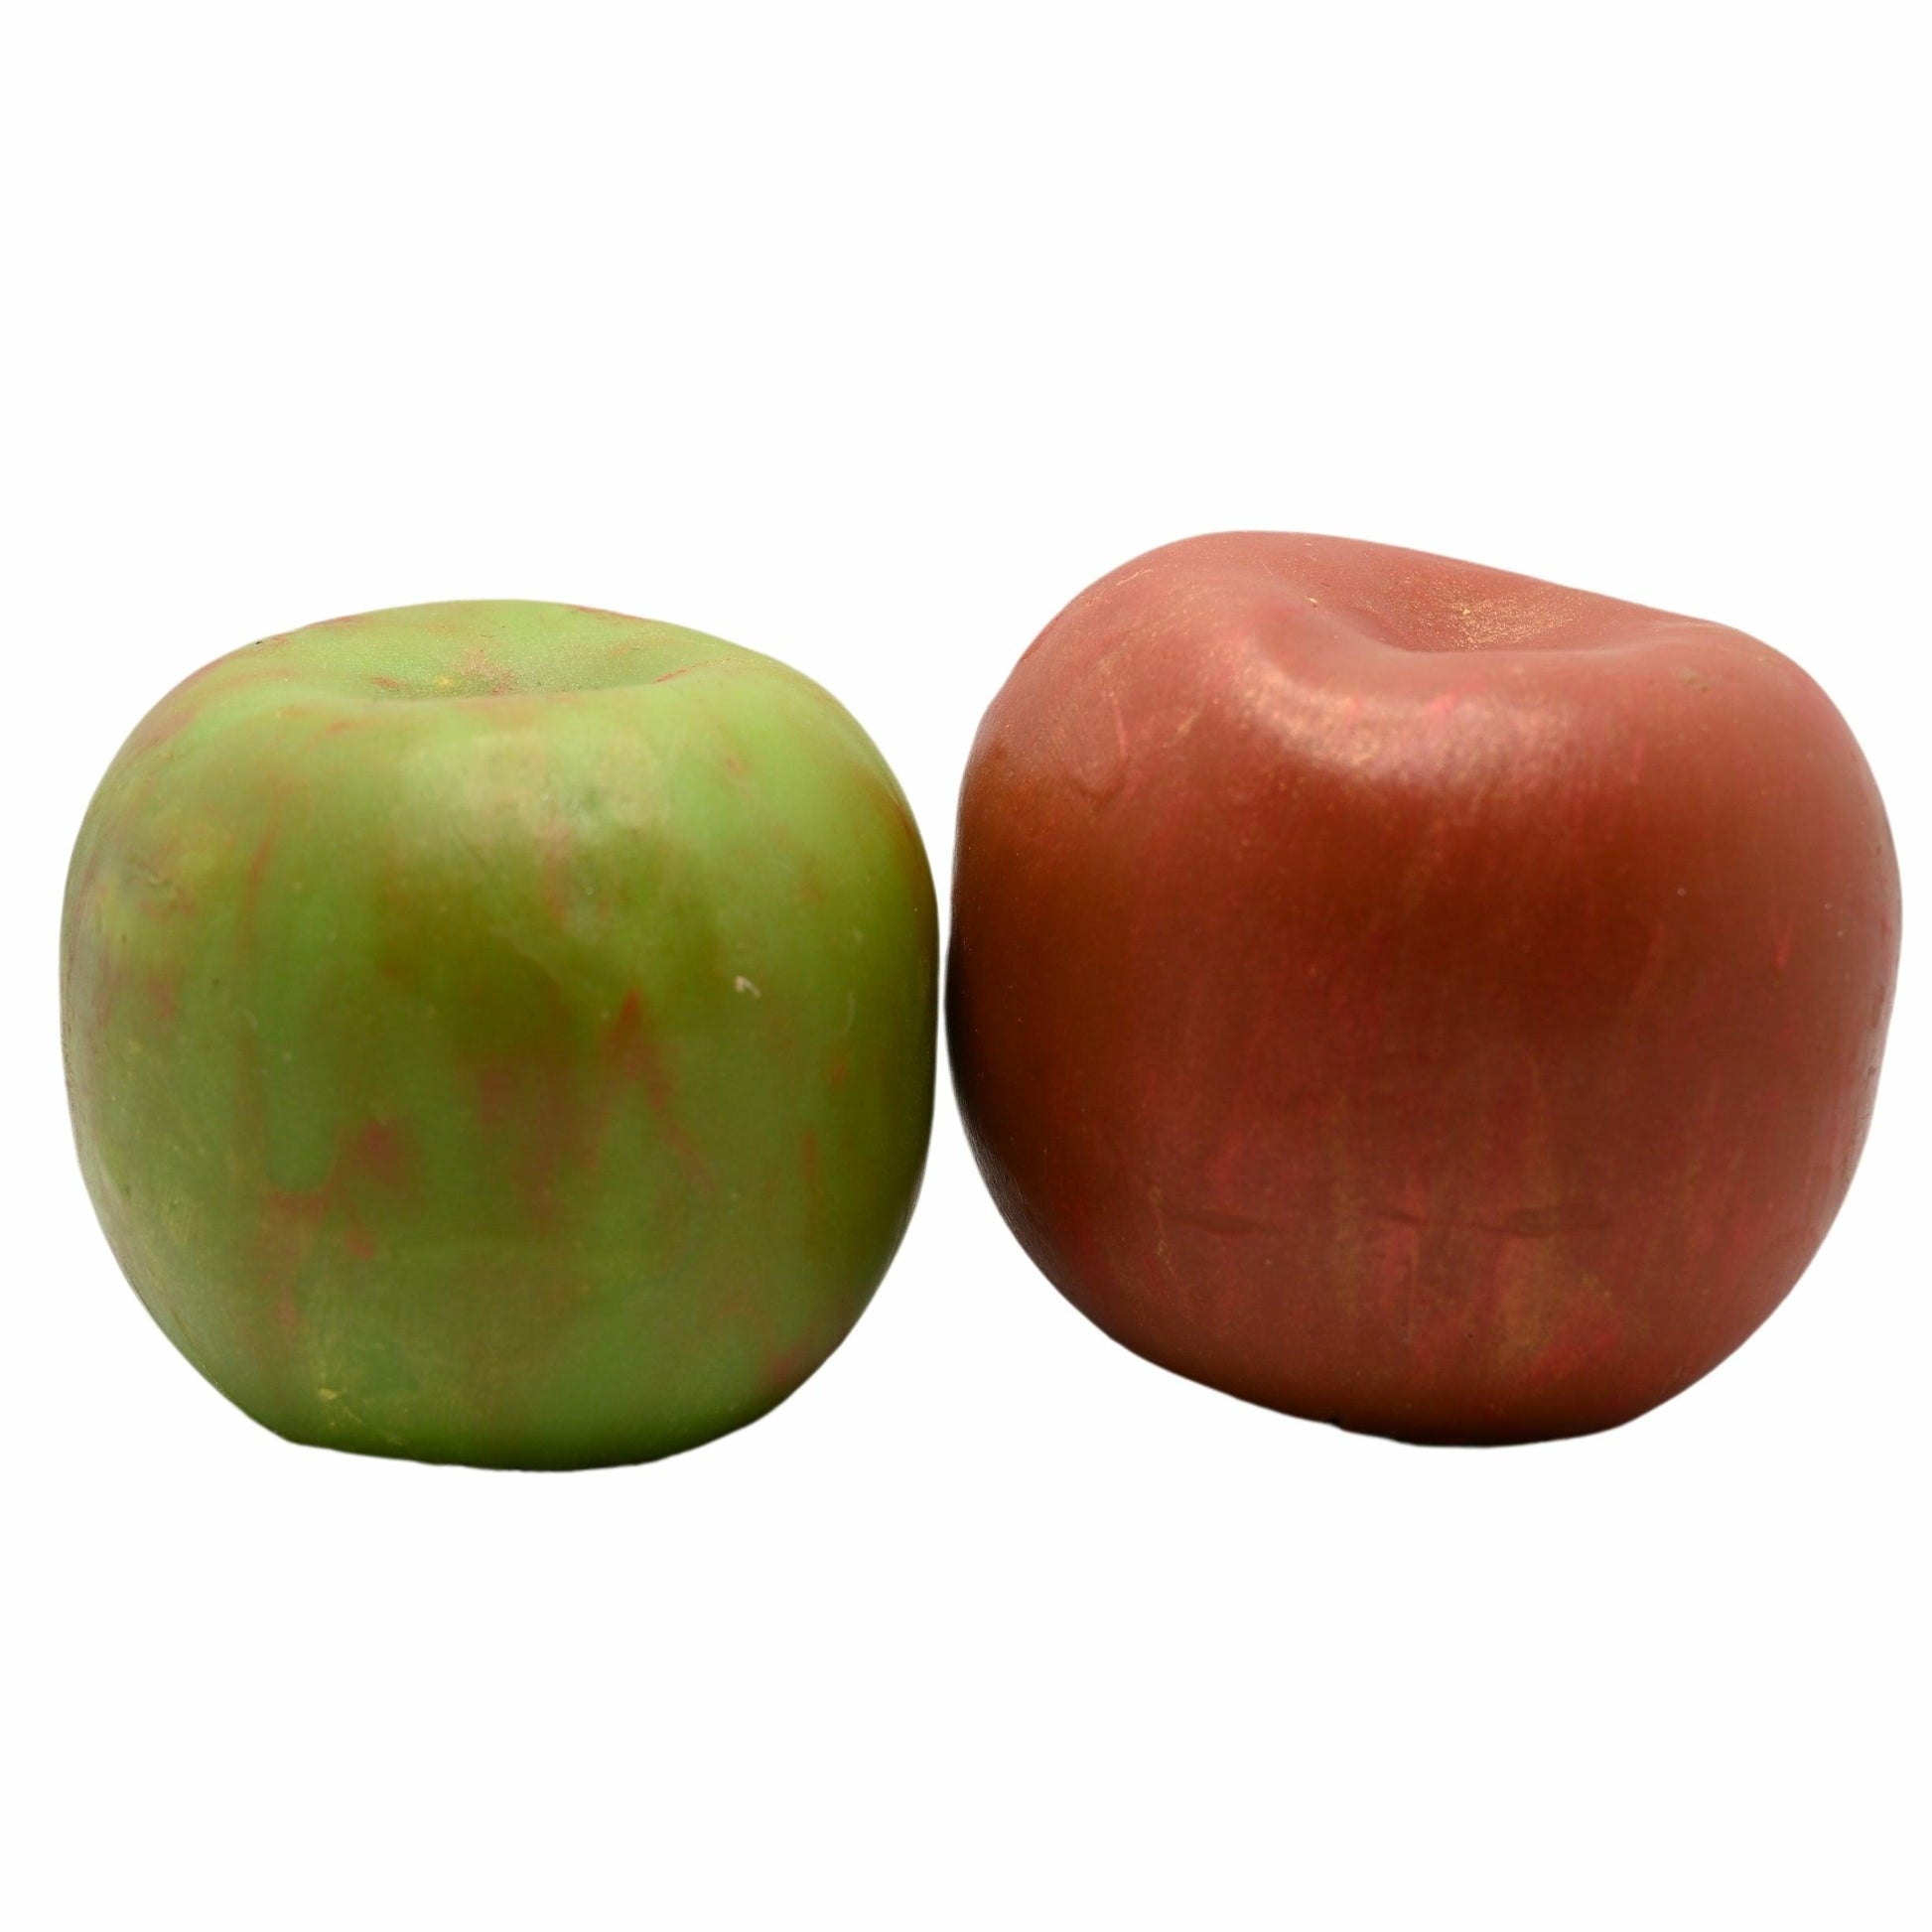 Apple of My Eye Scoop Soaps – Scoops Body Butter Parlor